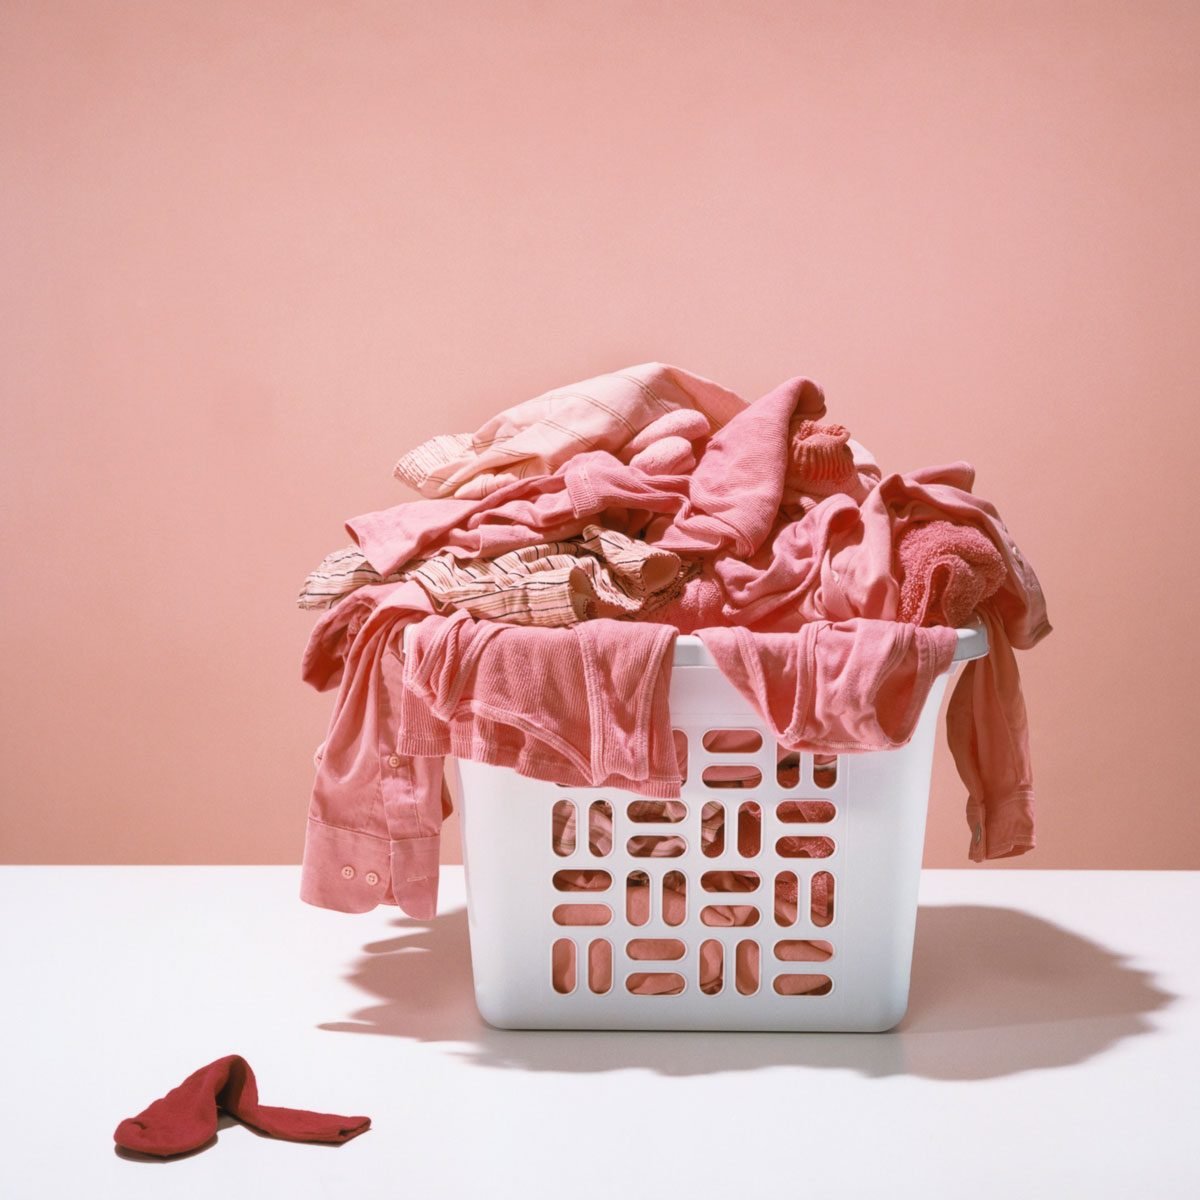 Items You Should Be Washing Separately From the Rest of Your Laundry